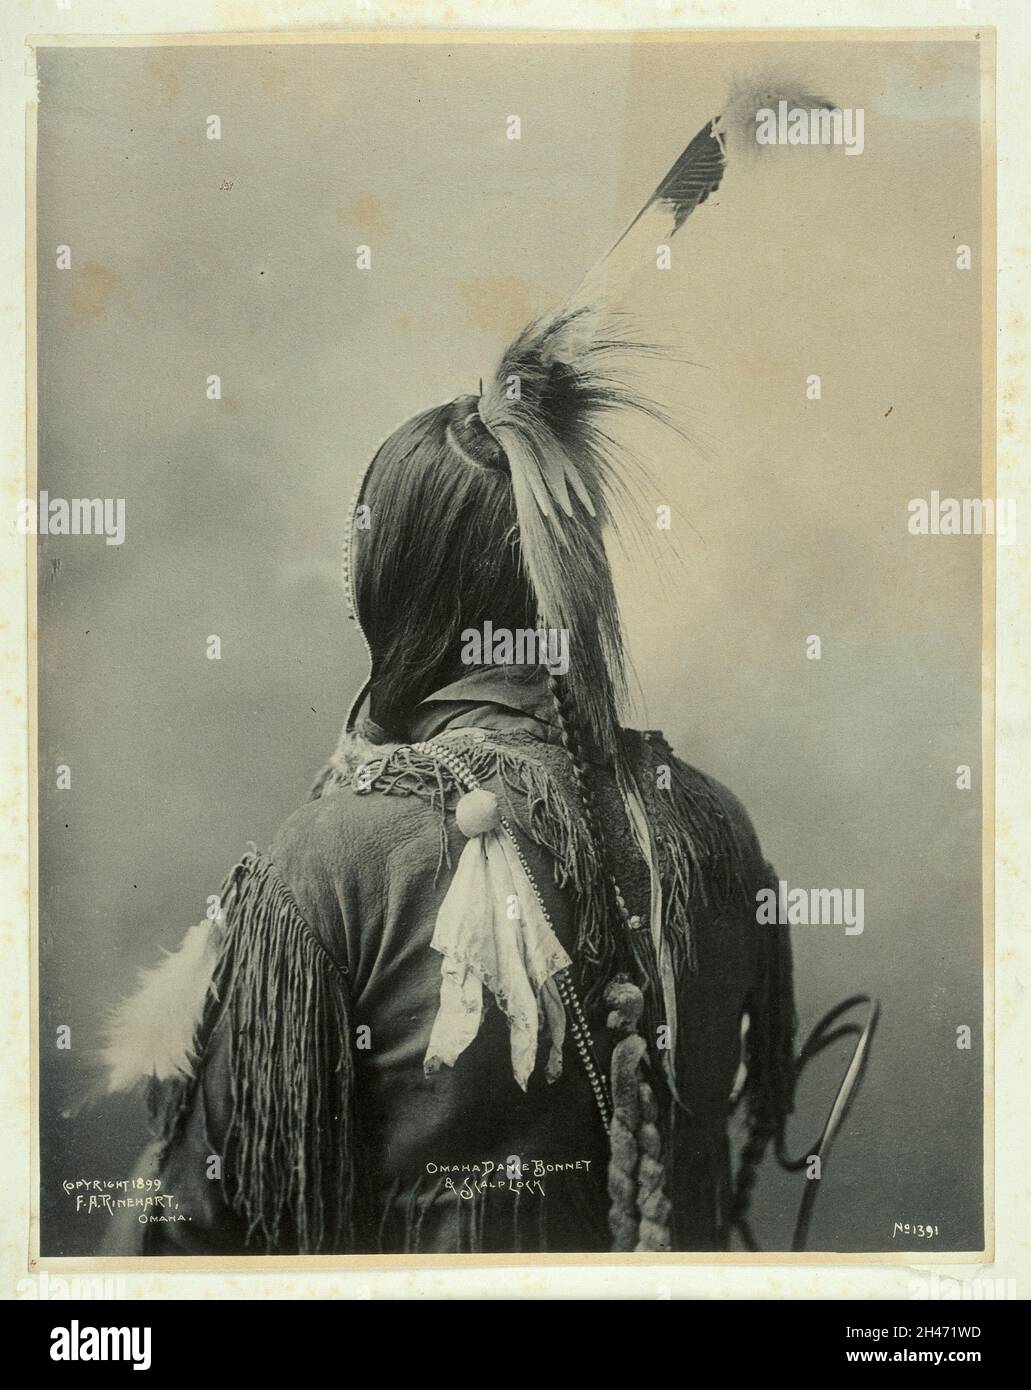 The back of an Omaha Indian. Platinum print by F.A. Rinehart, 1899. Stock Photo